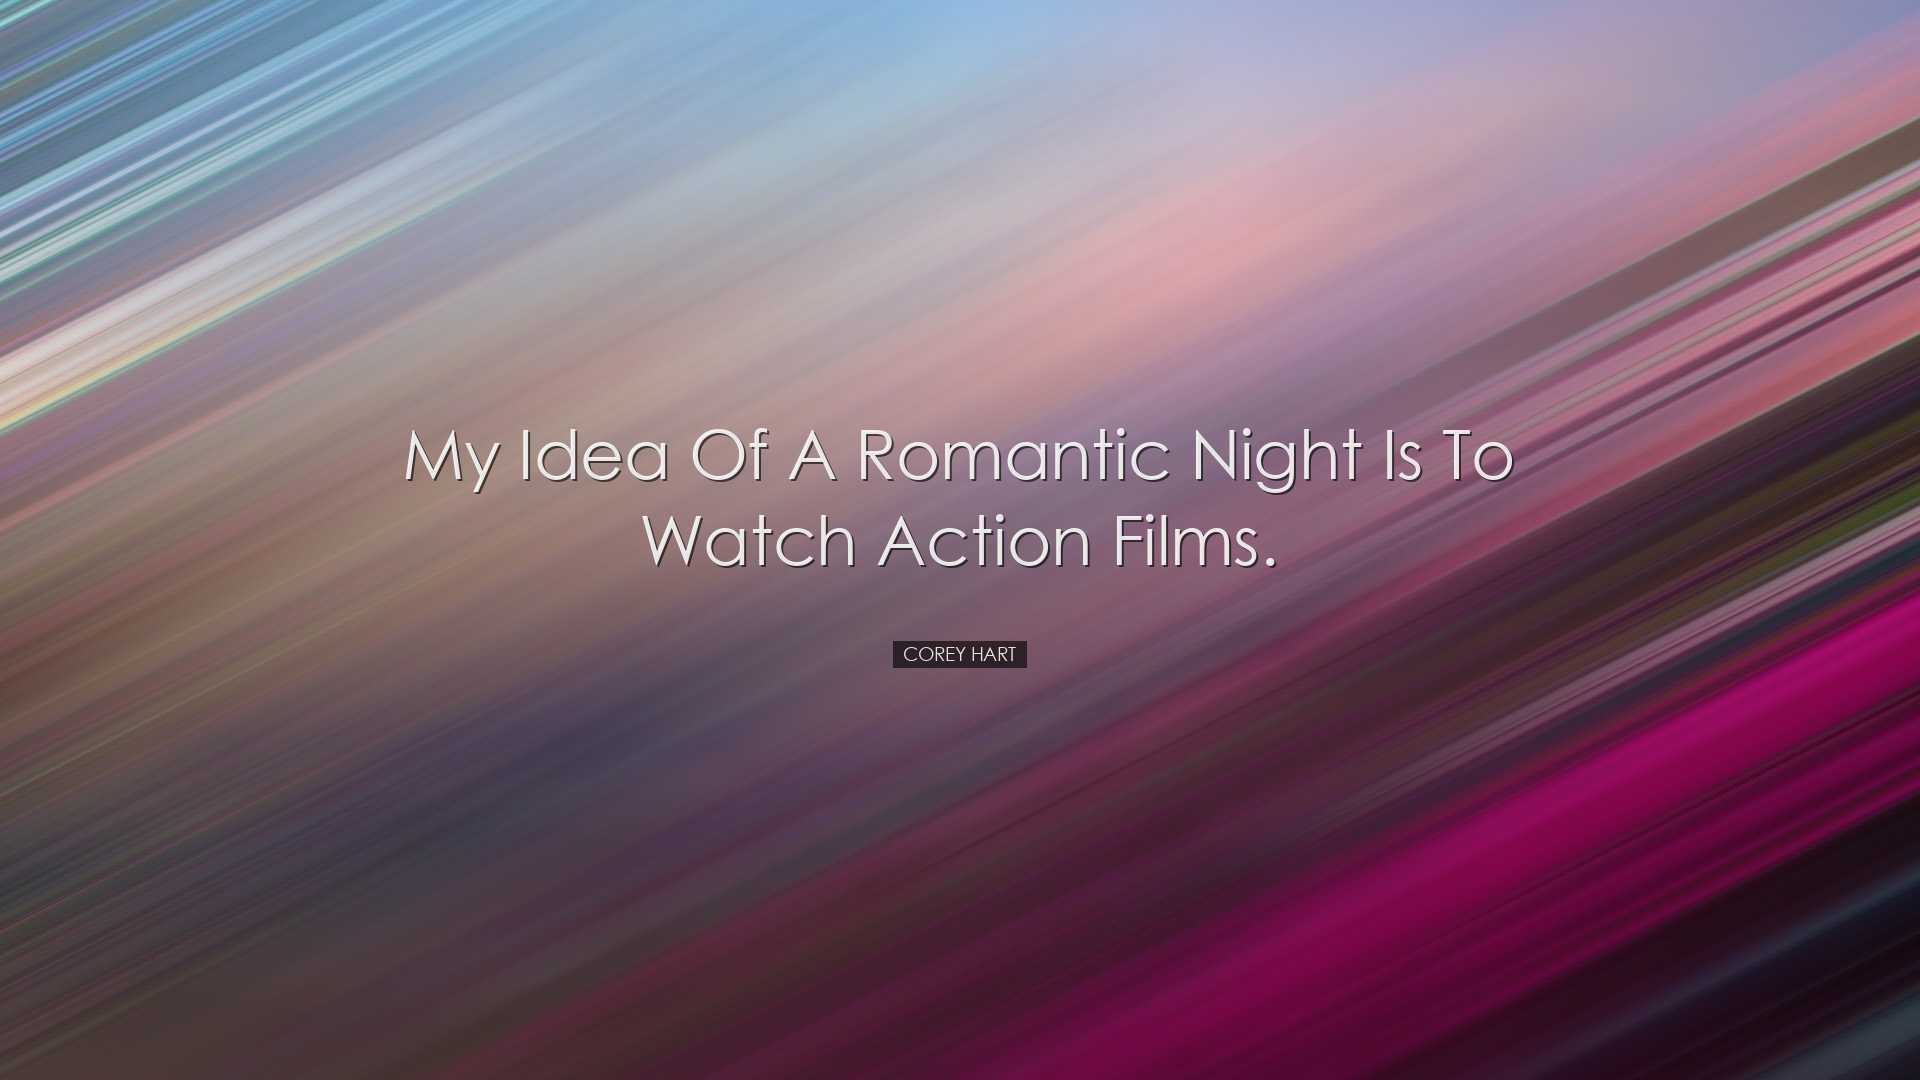 My idea of a romantic night is to watch action films. - Corey Hart